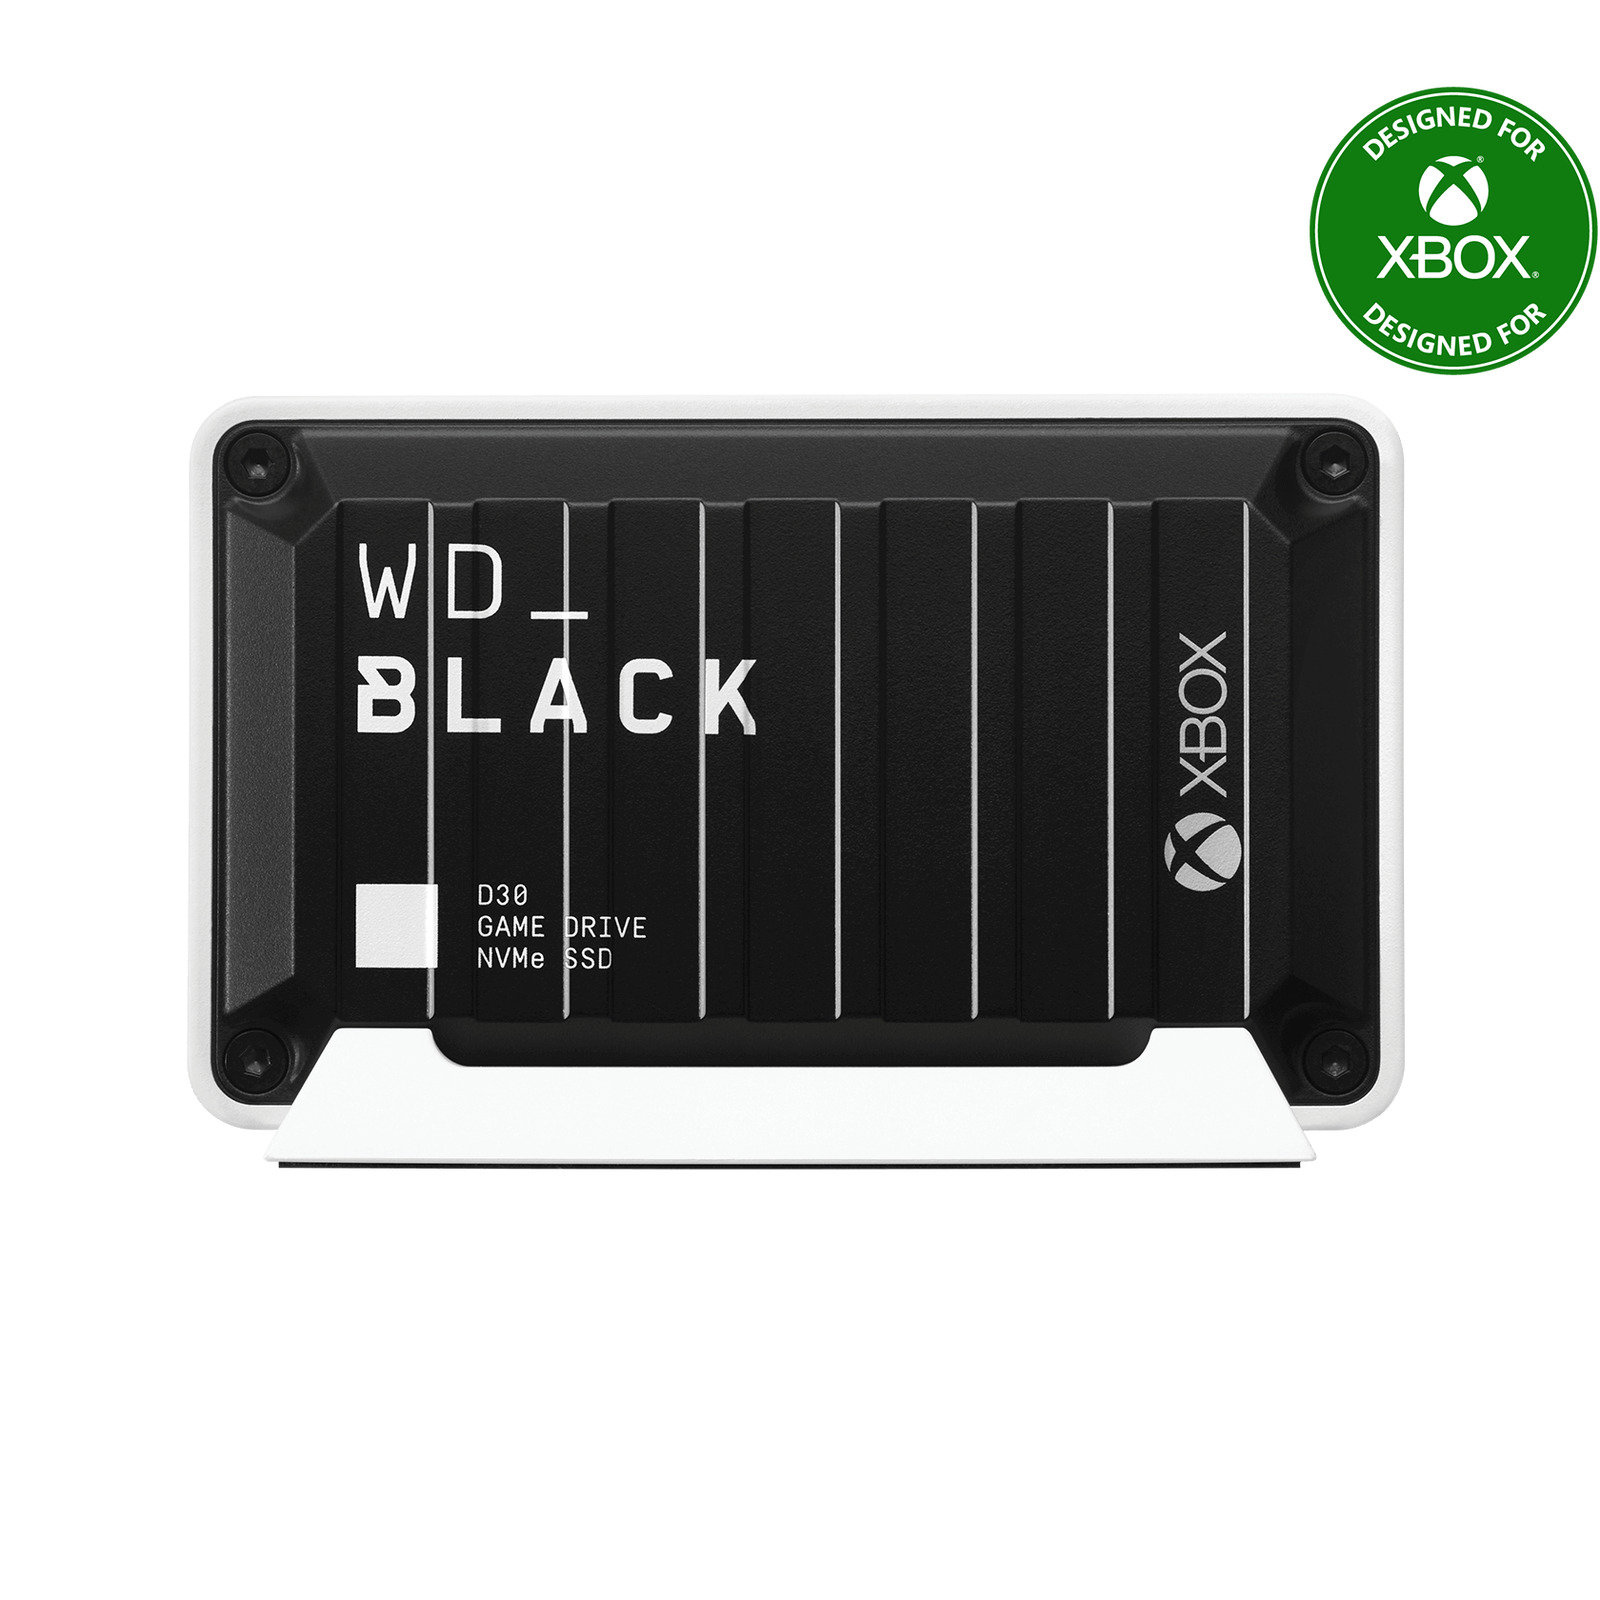 WD_BLACK 500GB D30 Game Drive for Xbox, External SSD - WDBAMF5000ABW-WESN